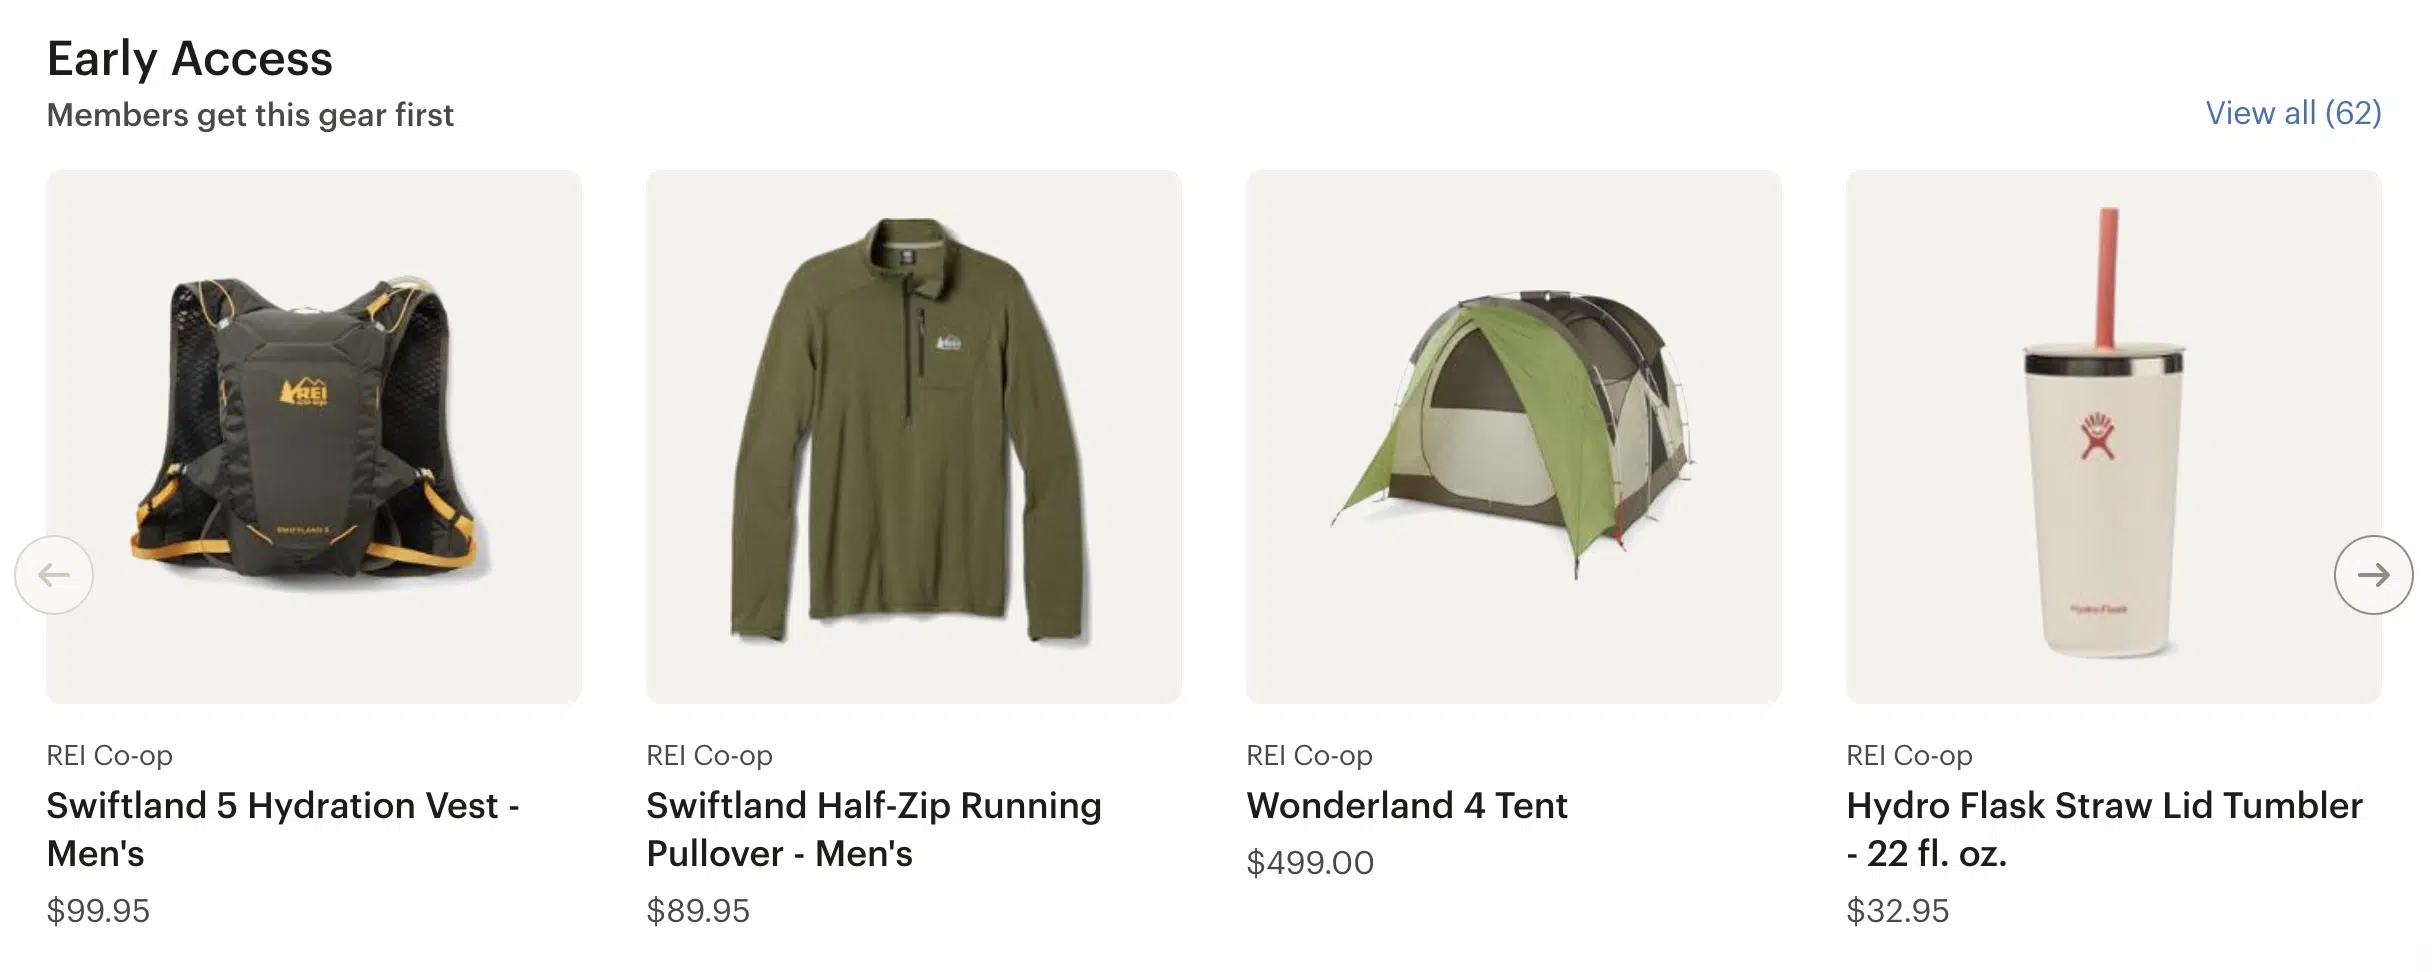 Product tiles of gear available to REI members